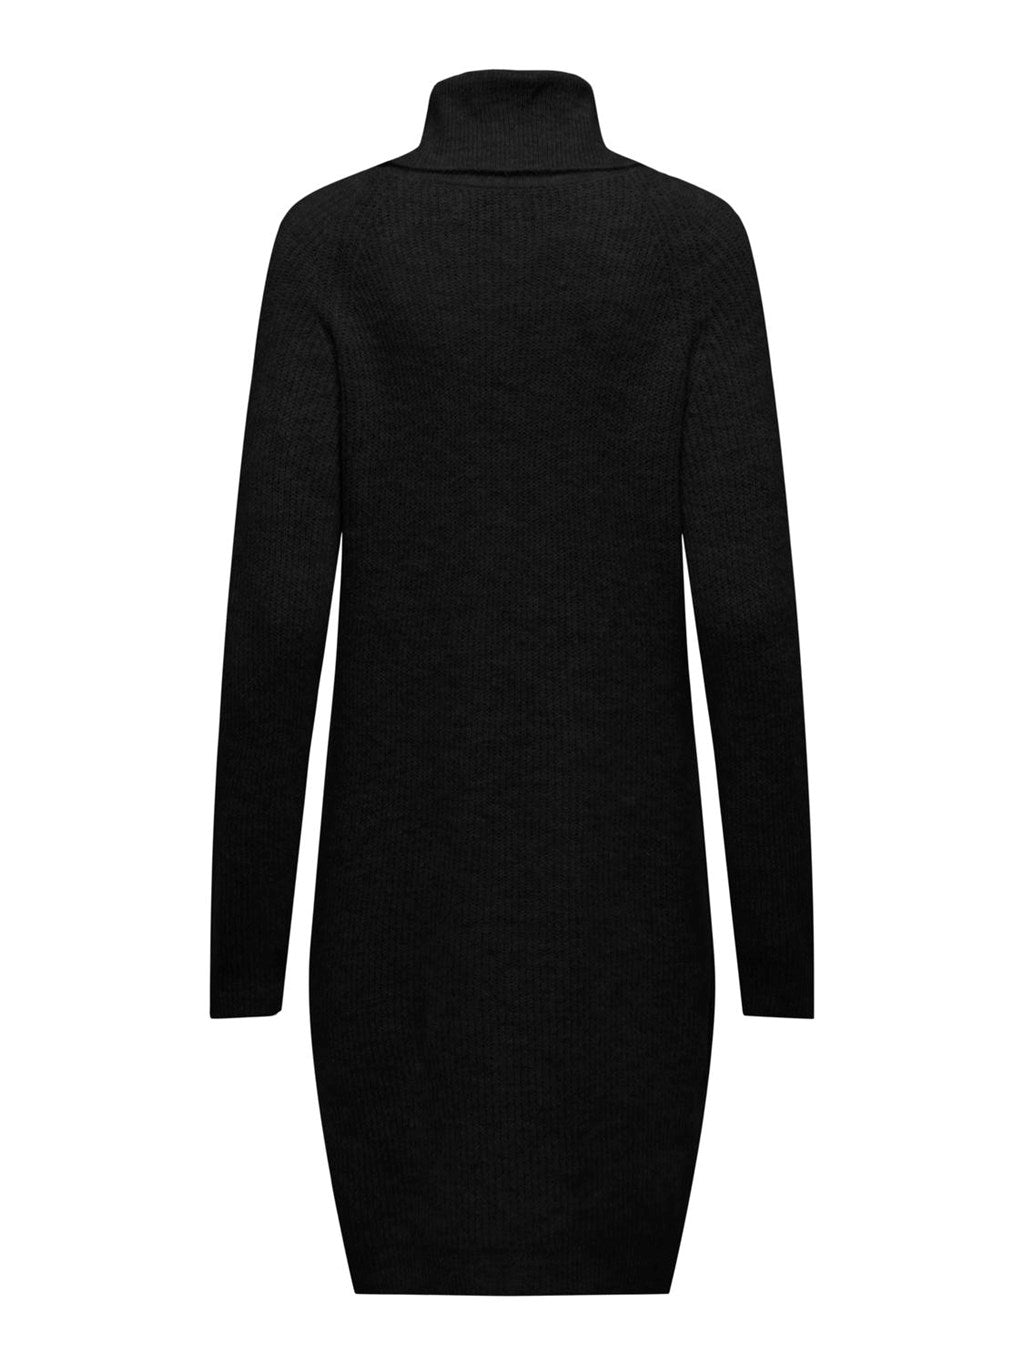 Only Carly Rollneck Dress in Black